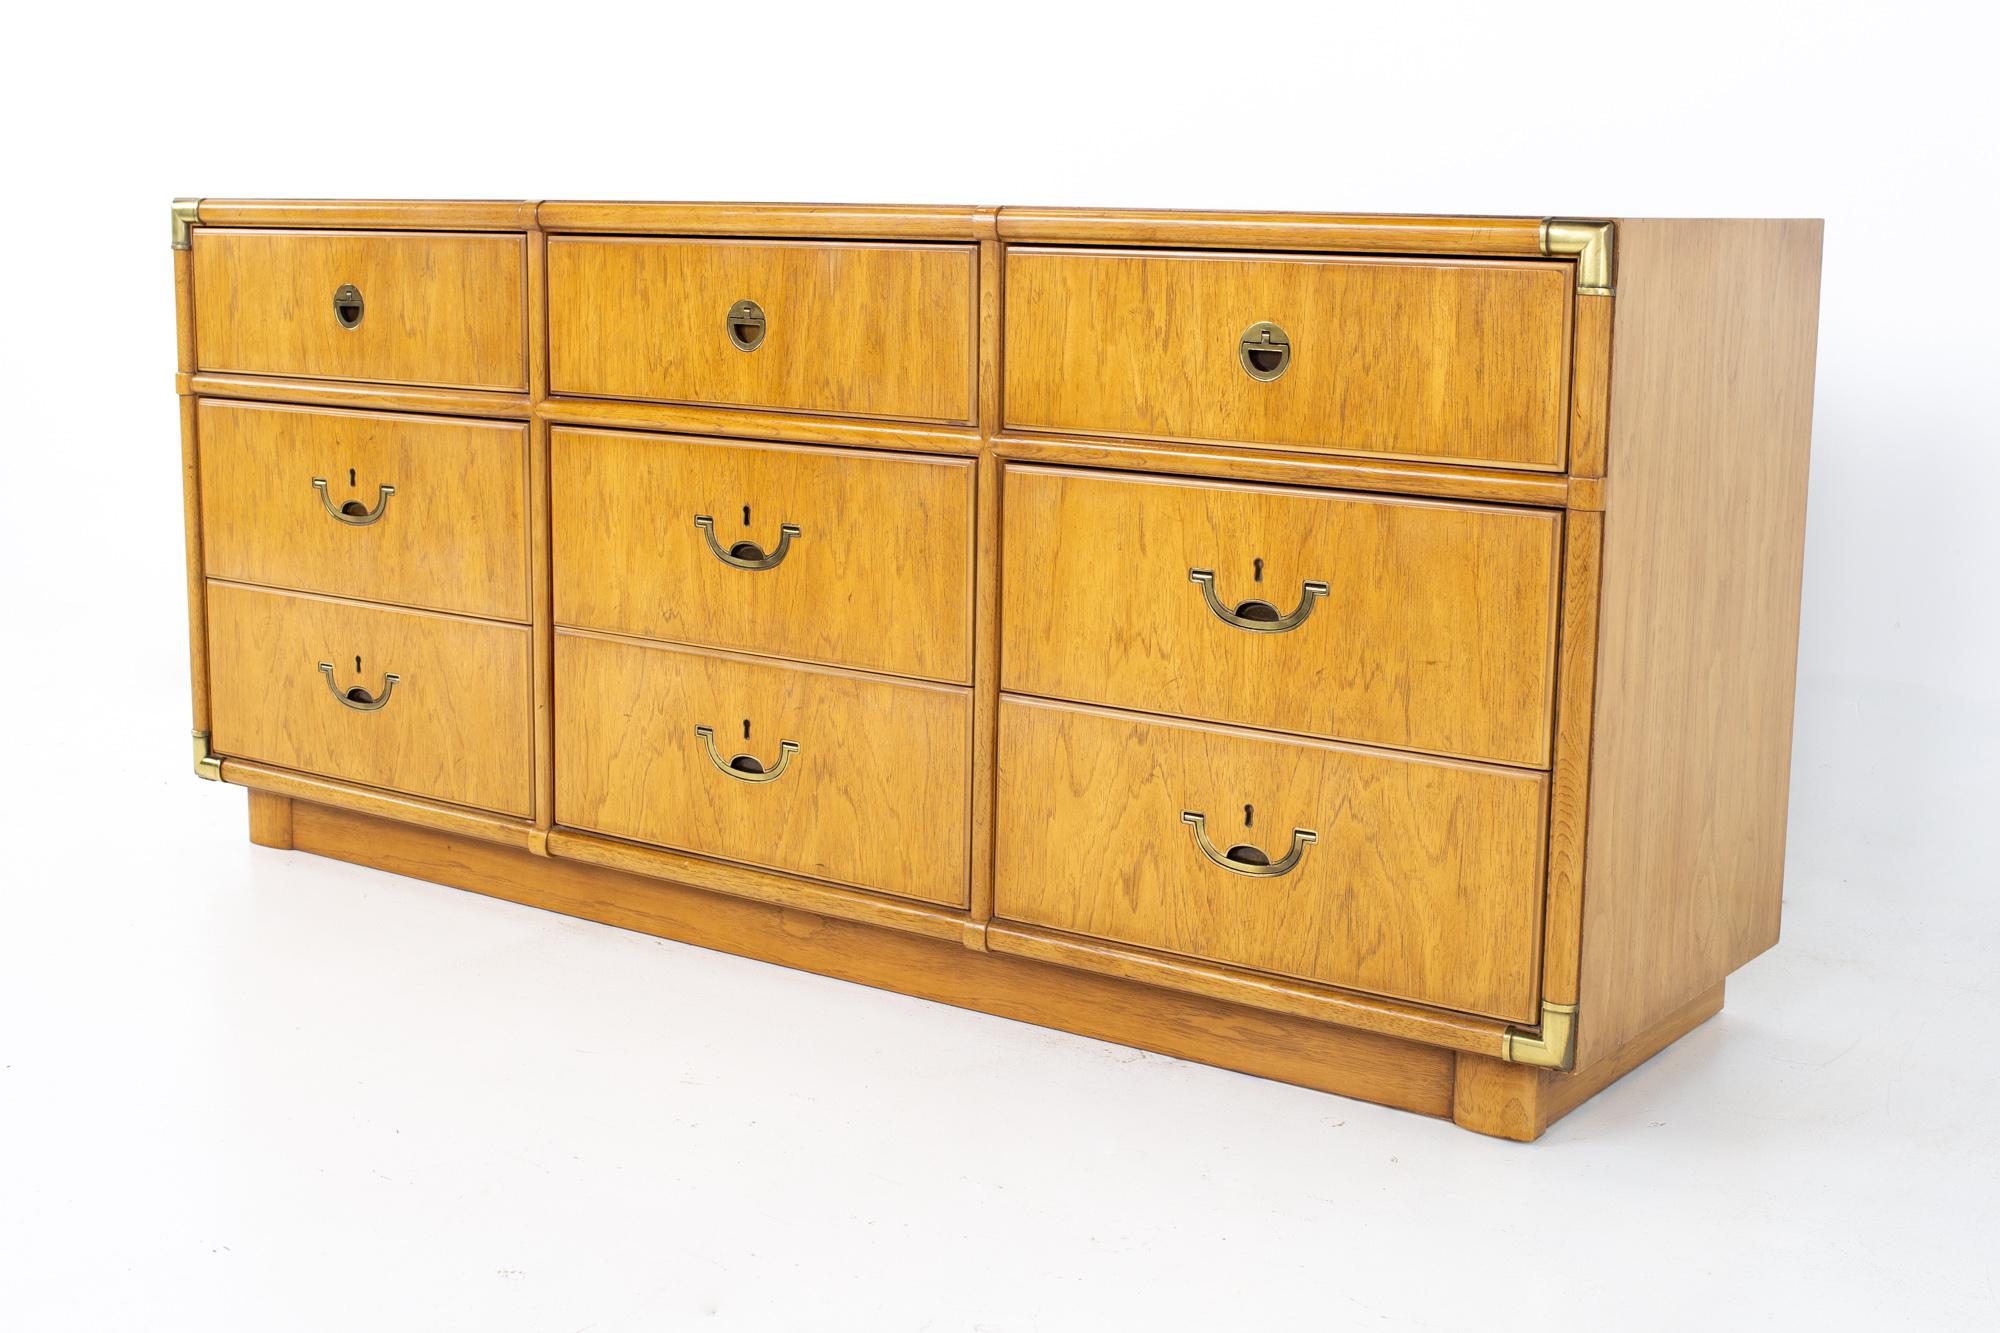 Drexel Campaign mid century walnut and brass 9 drawer lowboy dresser.
Dresser measures: 68 wide x 19 deep x 29.5 inches high

All pieces of furniture can be had in what we call restored vintage condition. That means the piece is restored upon